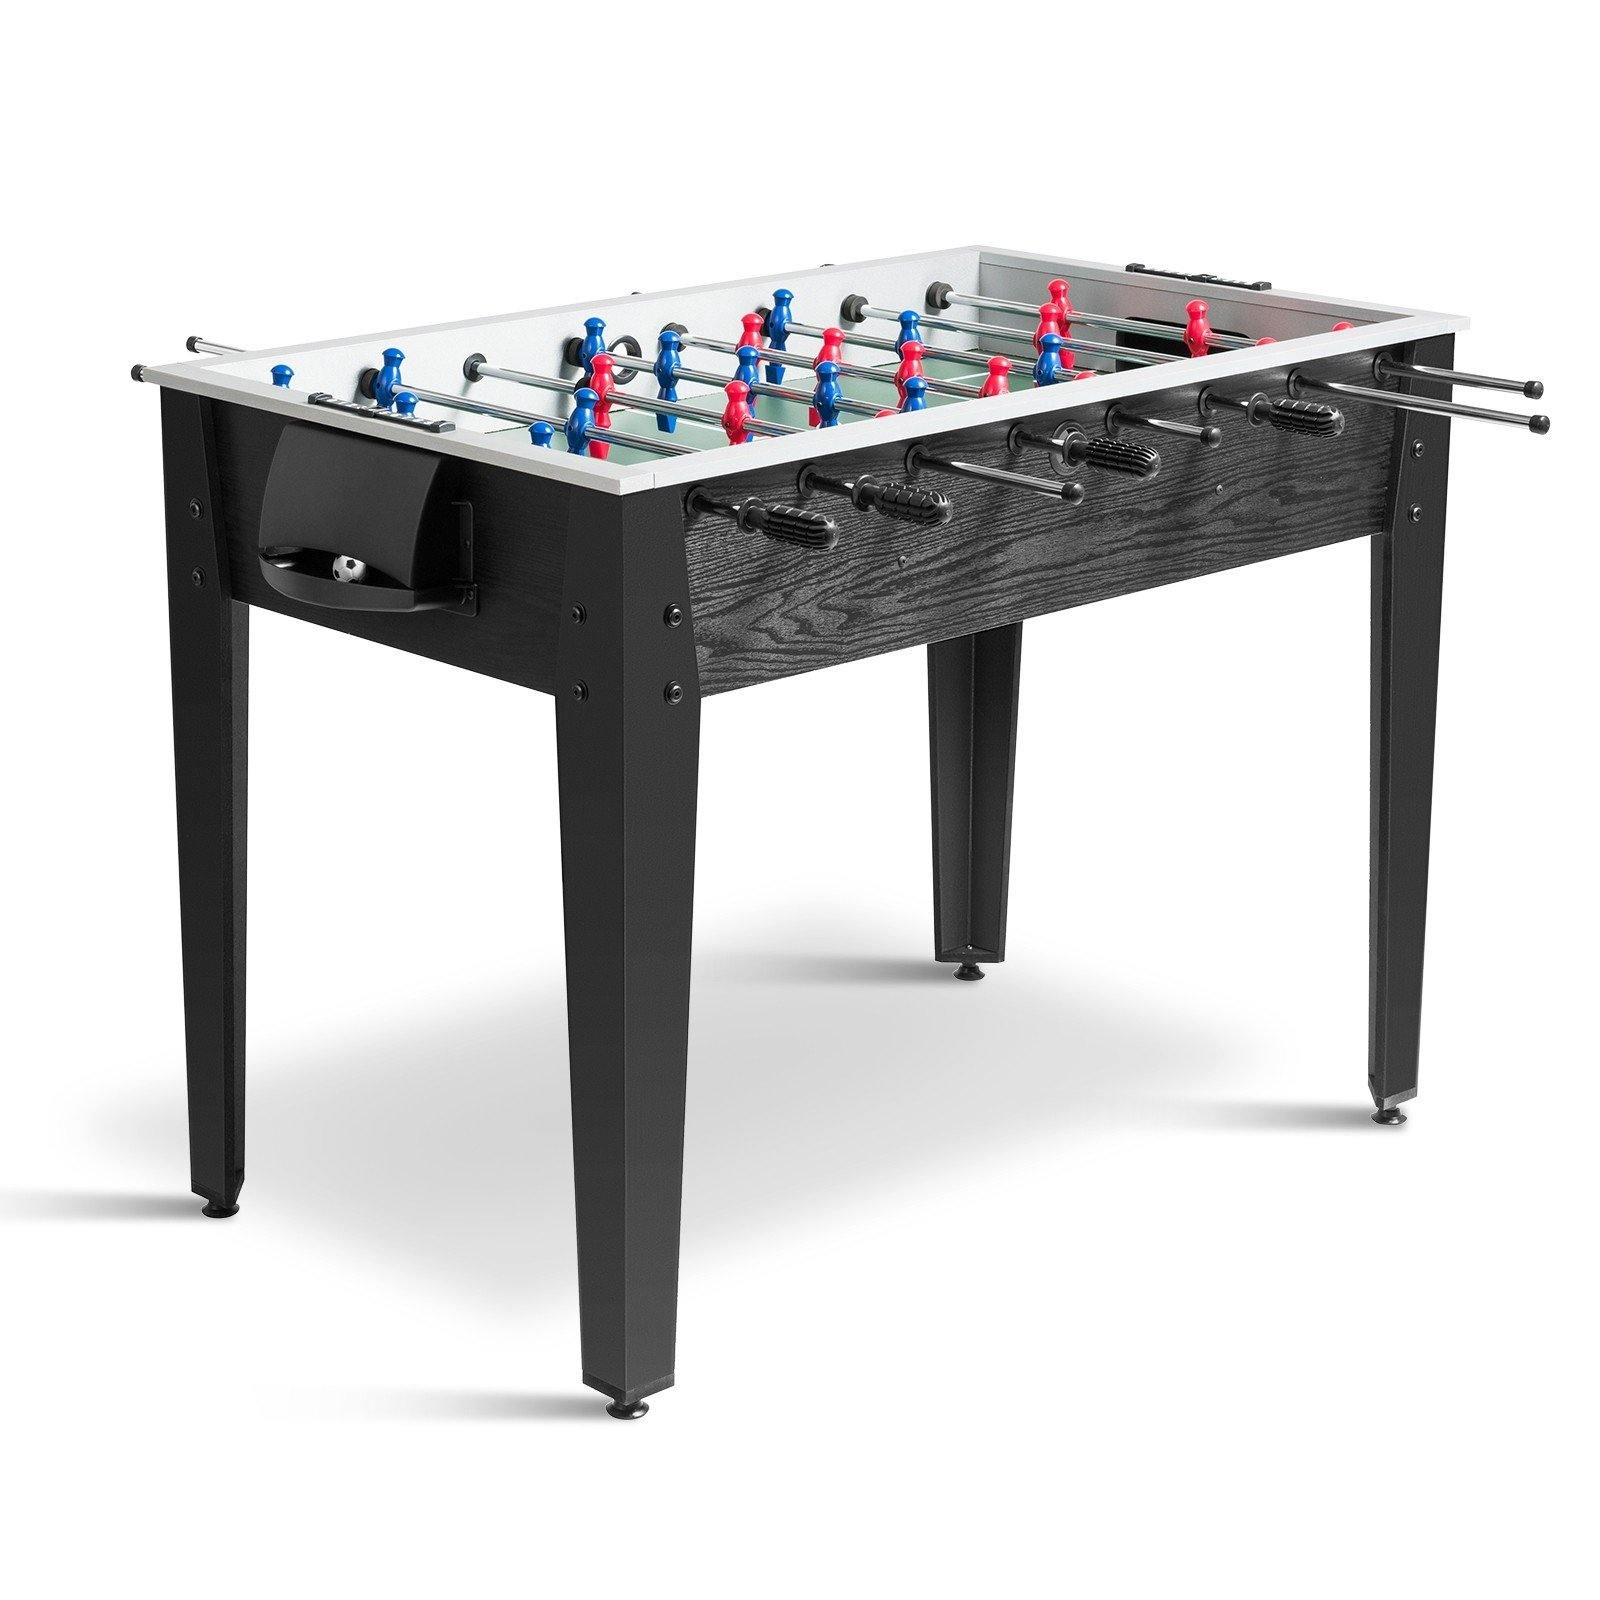 Giantex Foosball Table, Wooden Soccer Table Game w/ Footballs, Suit for 4 Players (48 inch) - Giantexus